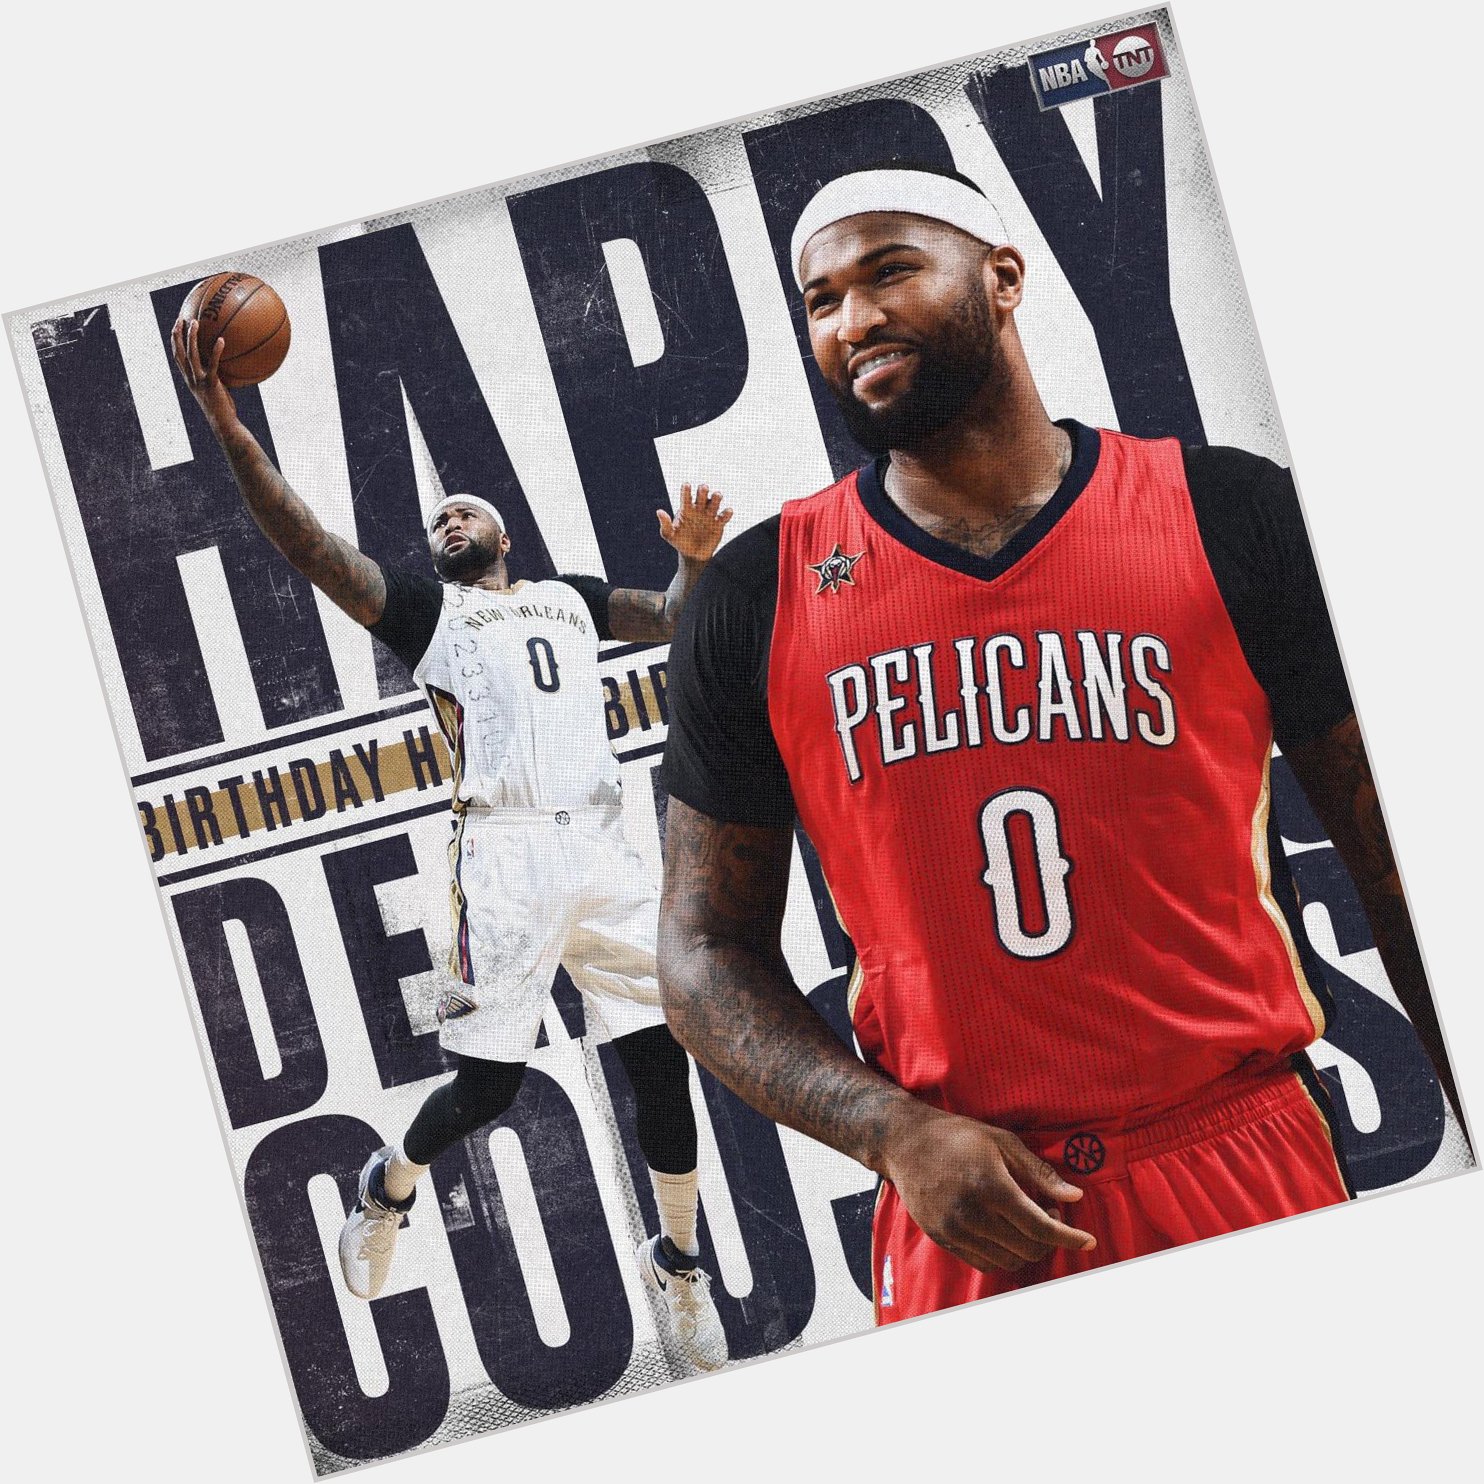 Happy Birthday to the 3-Time NBA All-Star, DeMarcus Cousins!  